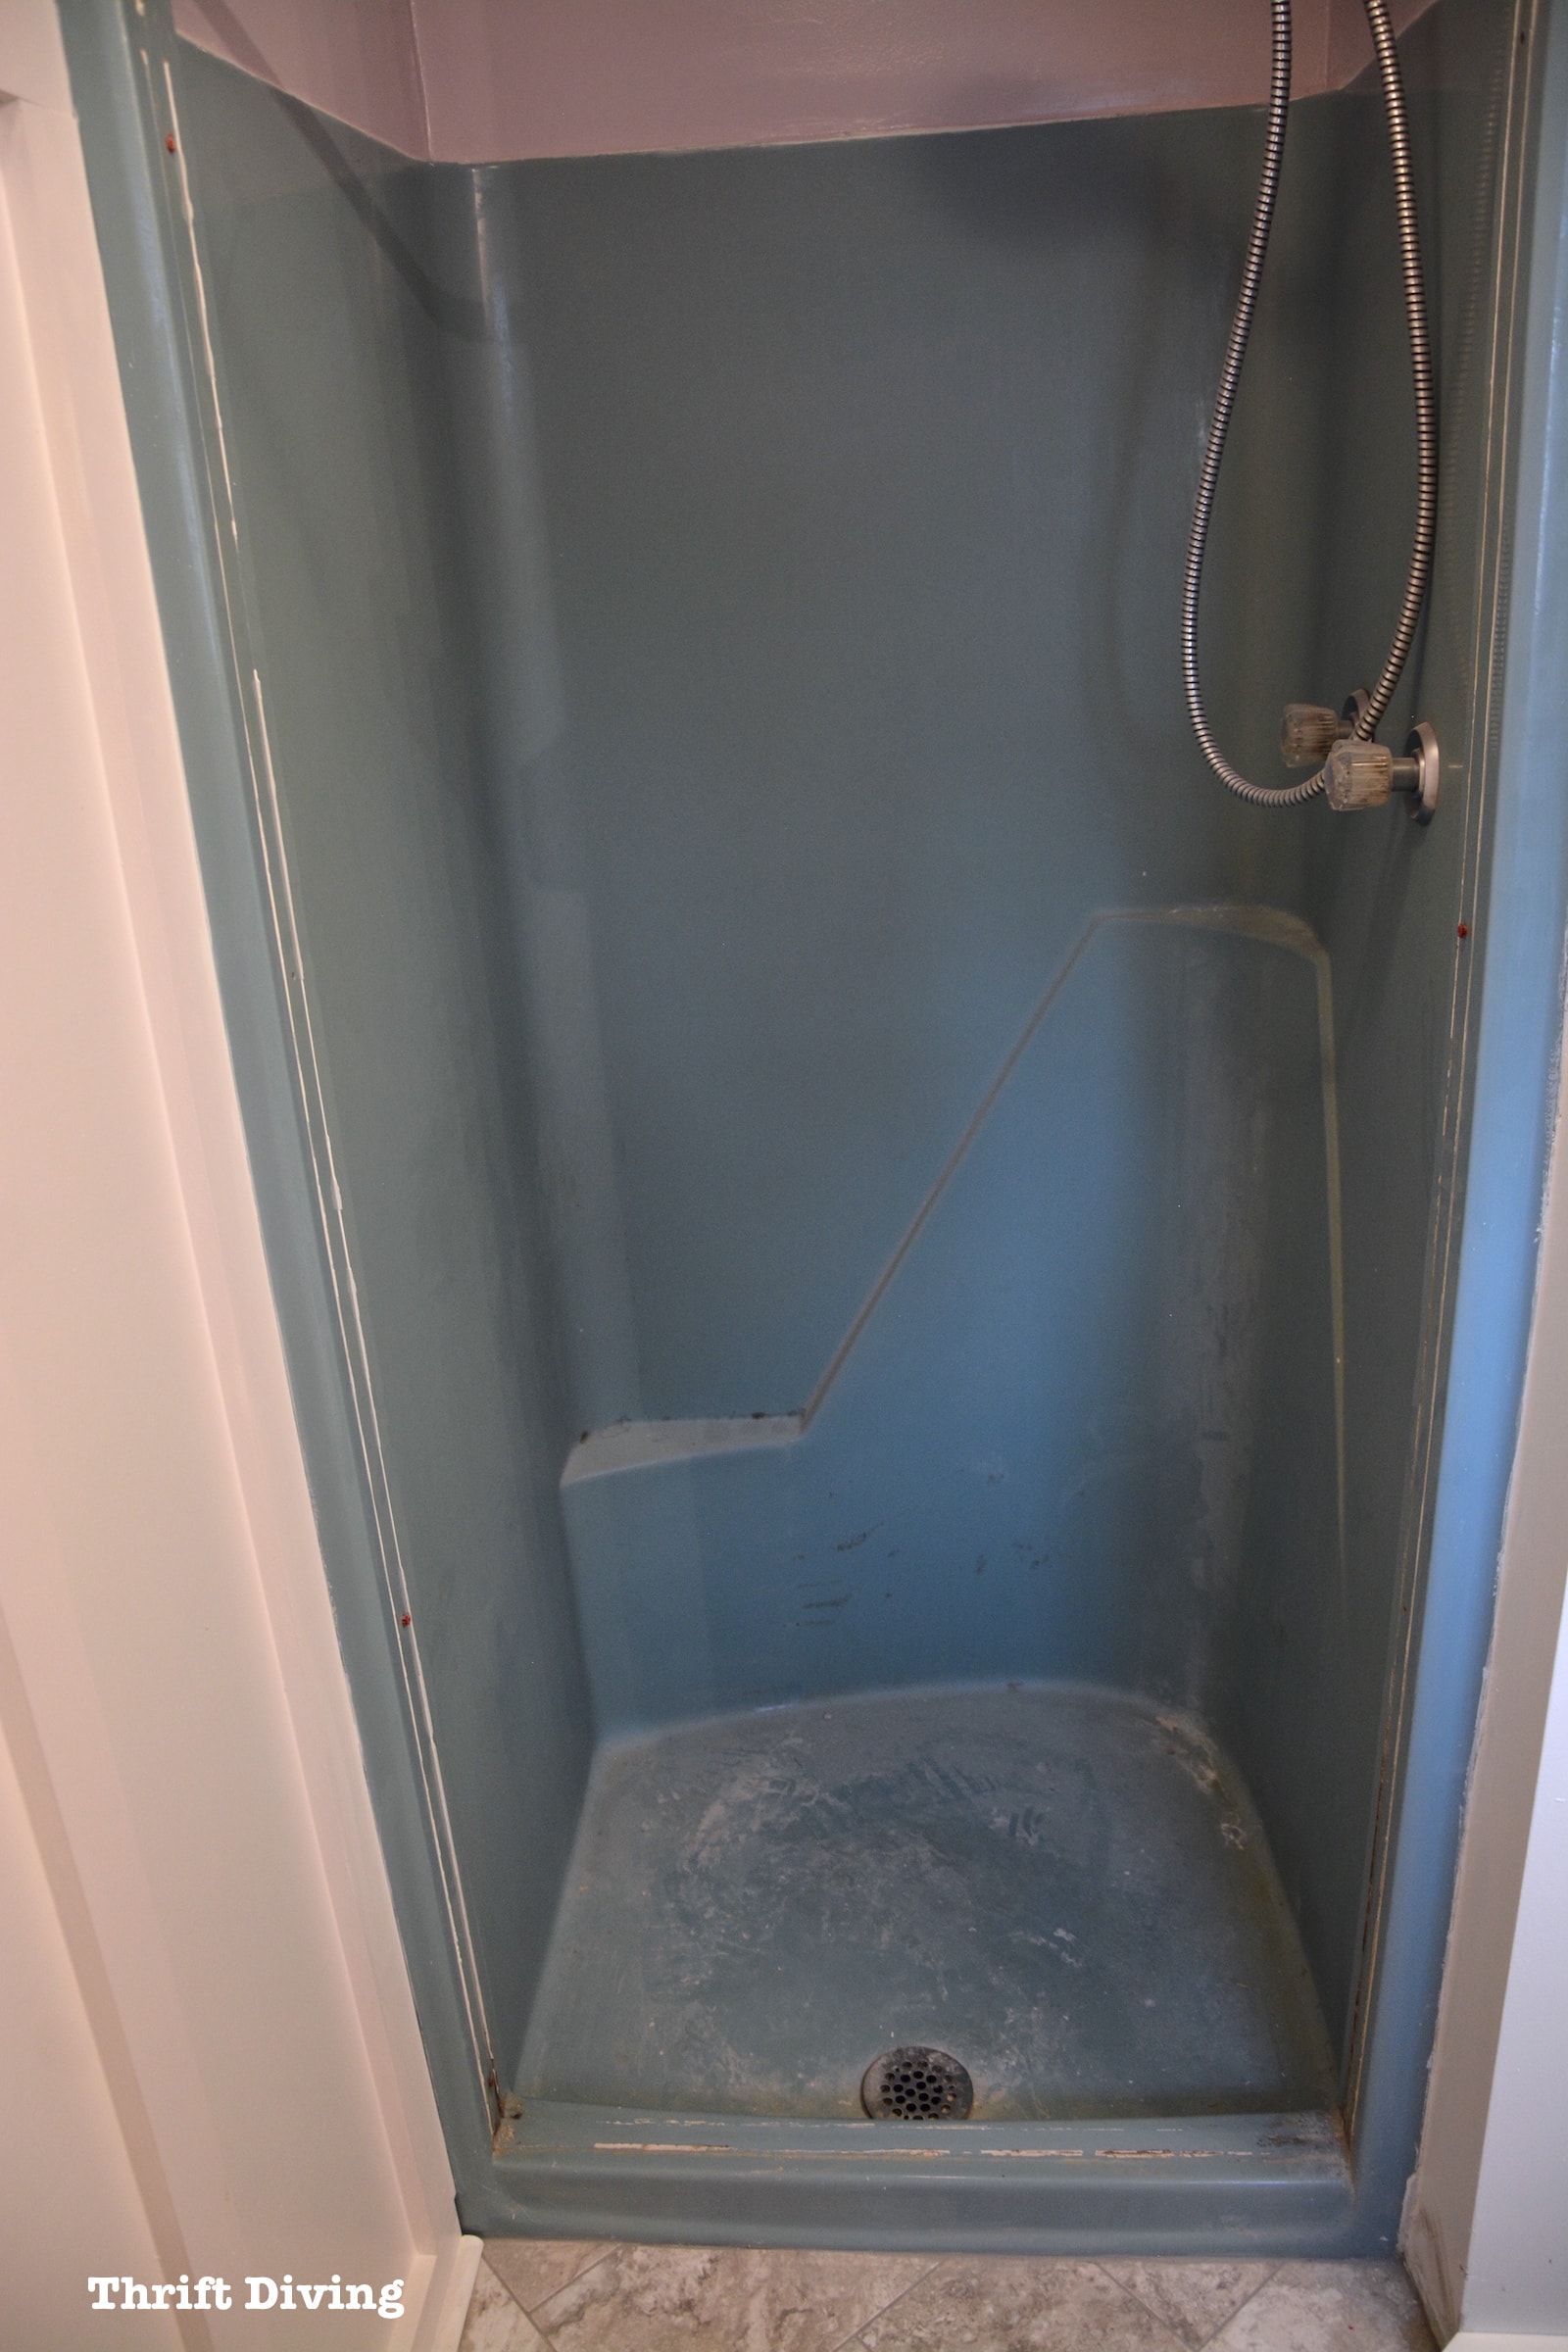 Shower-and-tub-refinishing-how-to-paint-a-shower-tub - Thrift Diving Blog - 8743